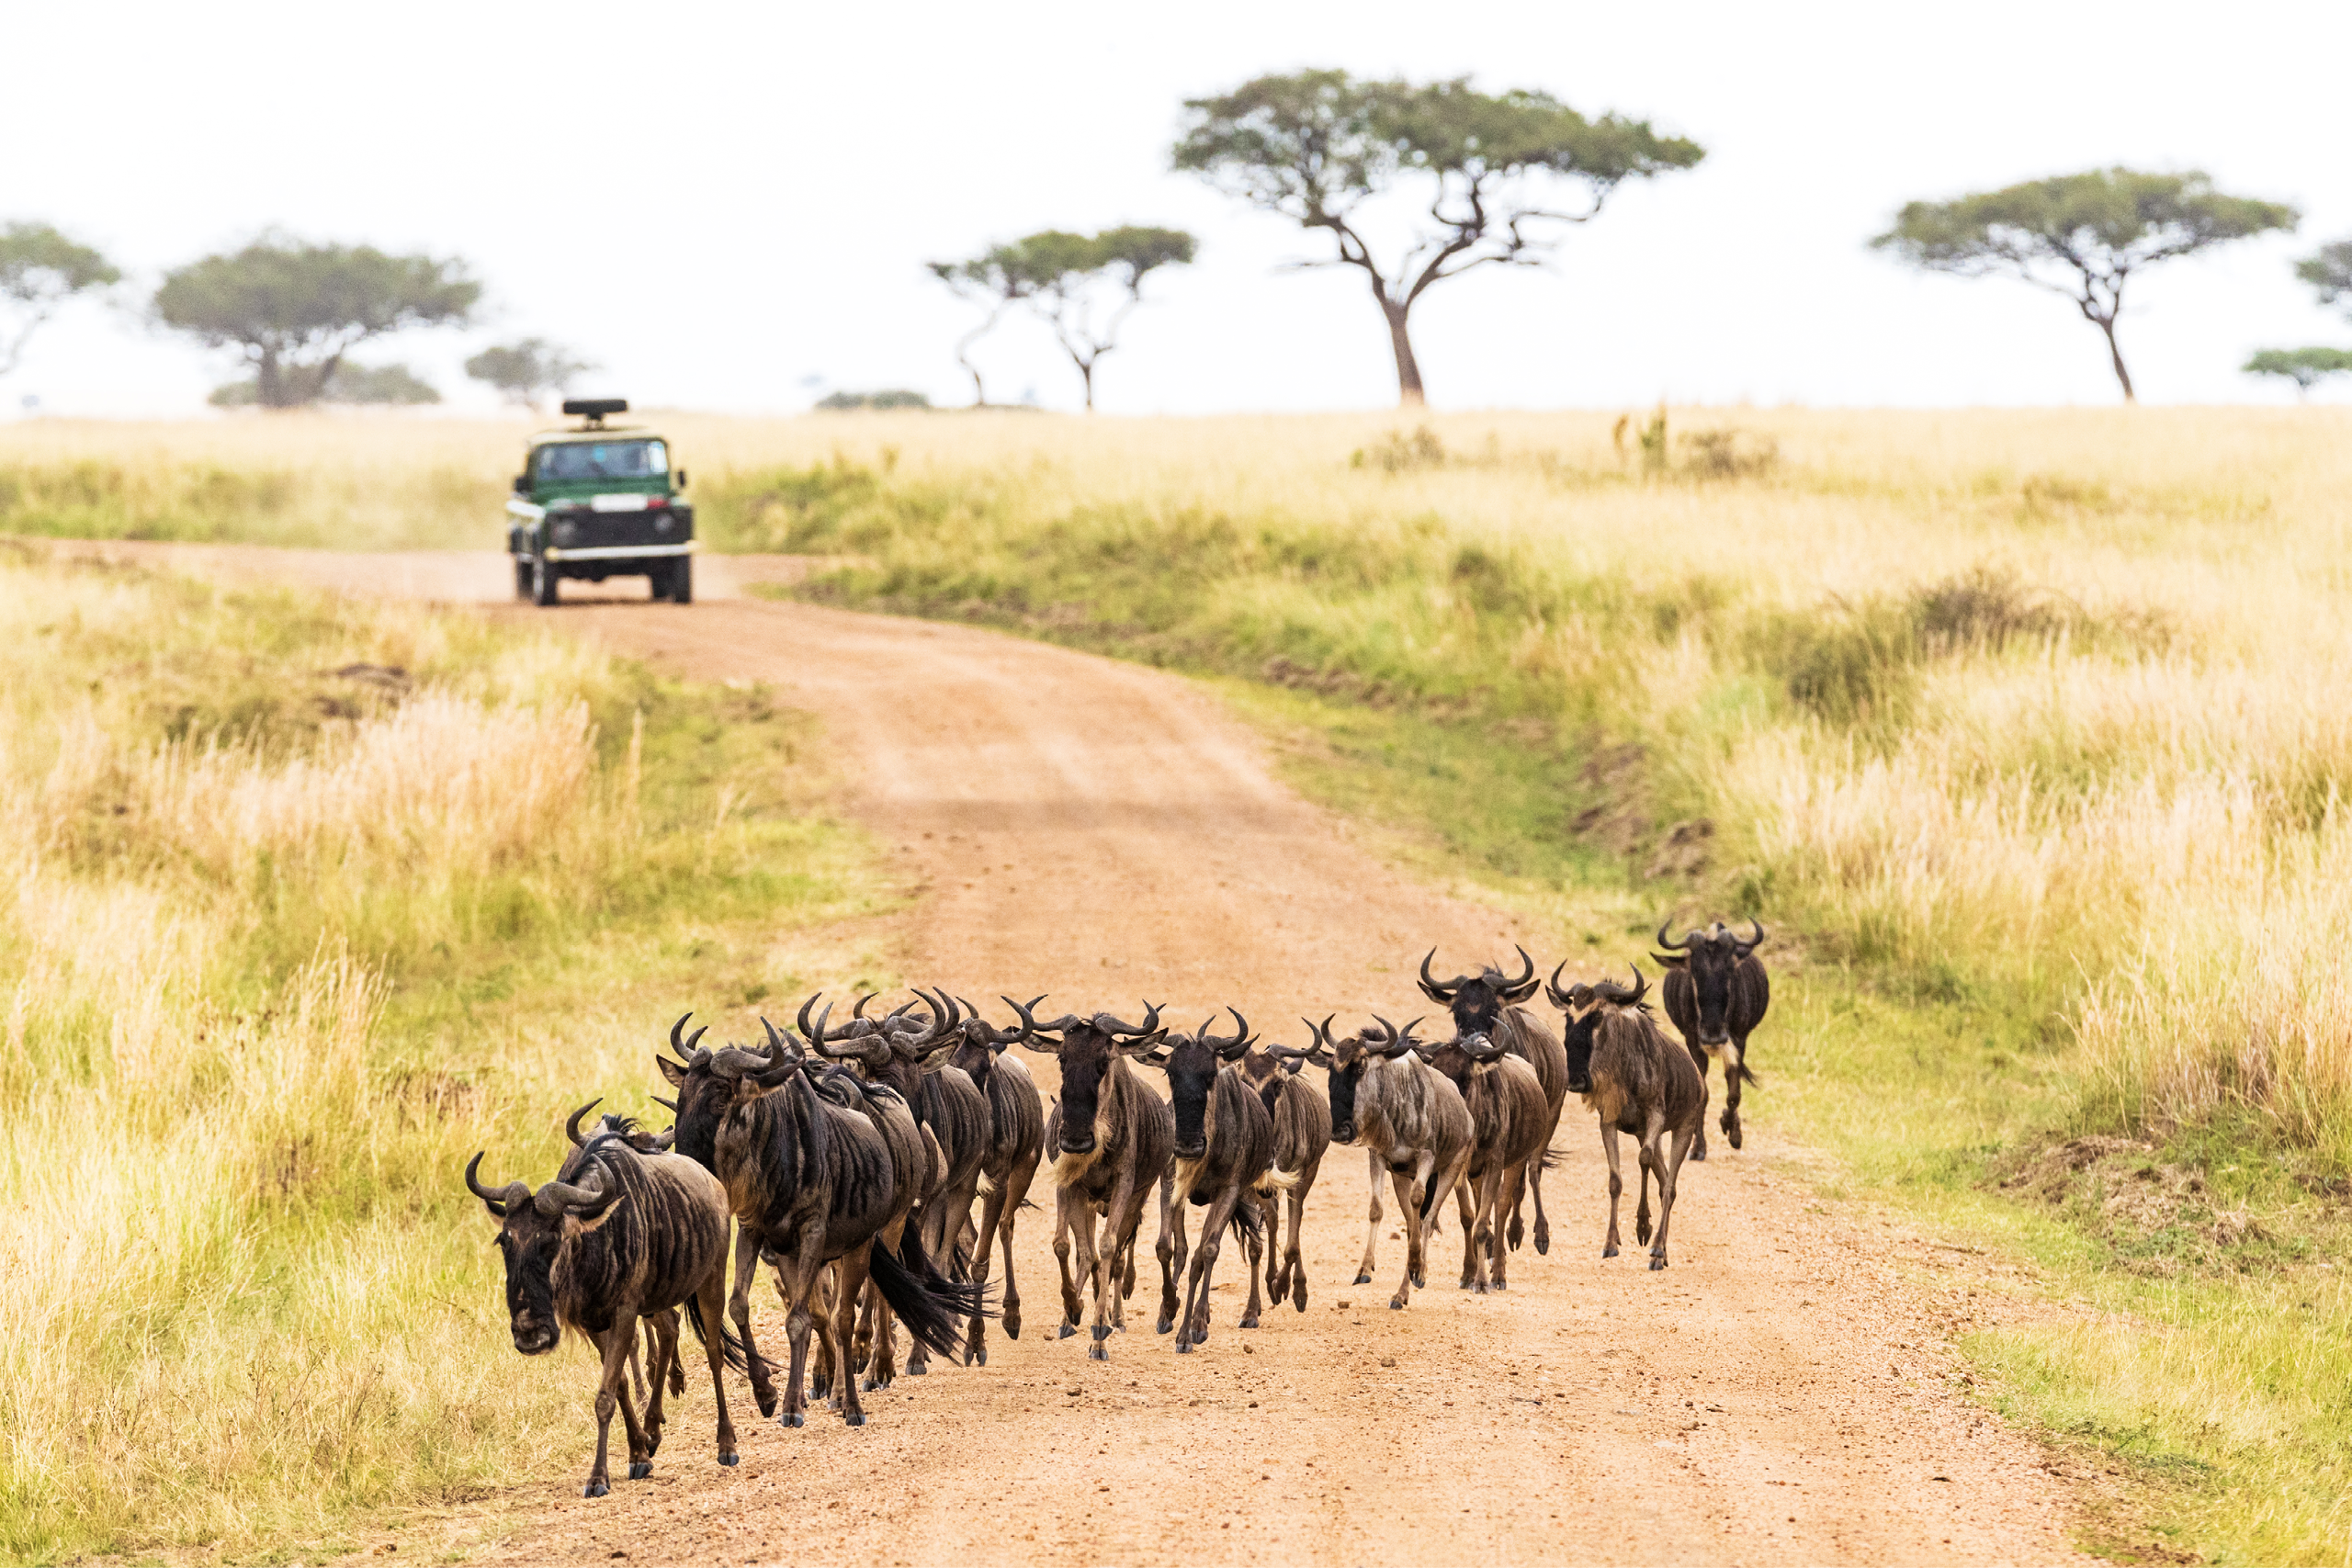 Wildebeest traveling along a dirt road